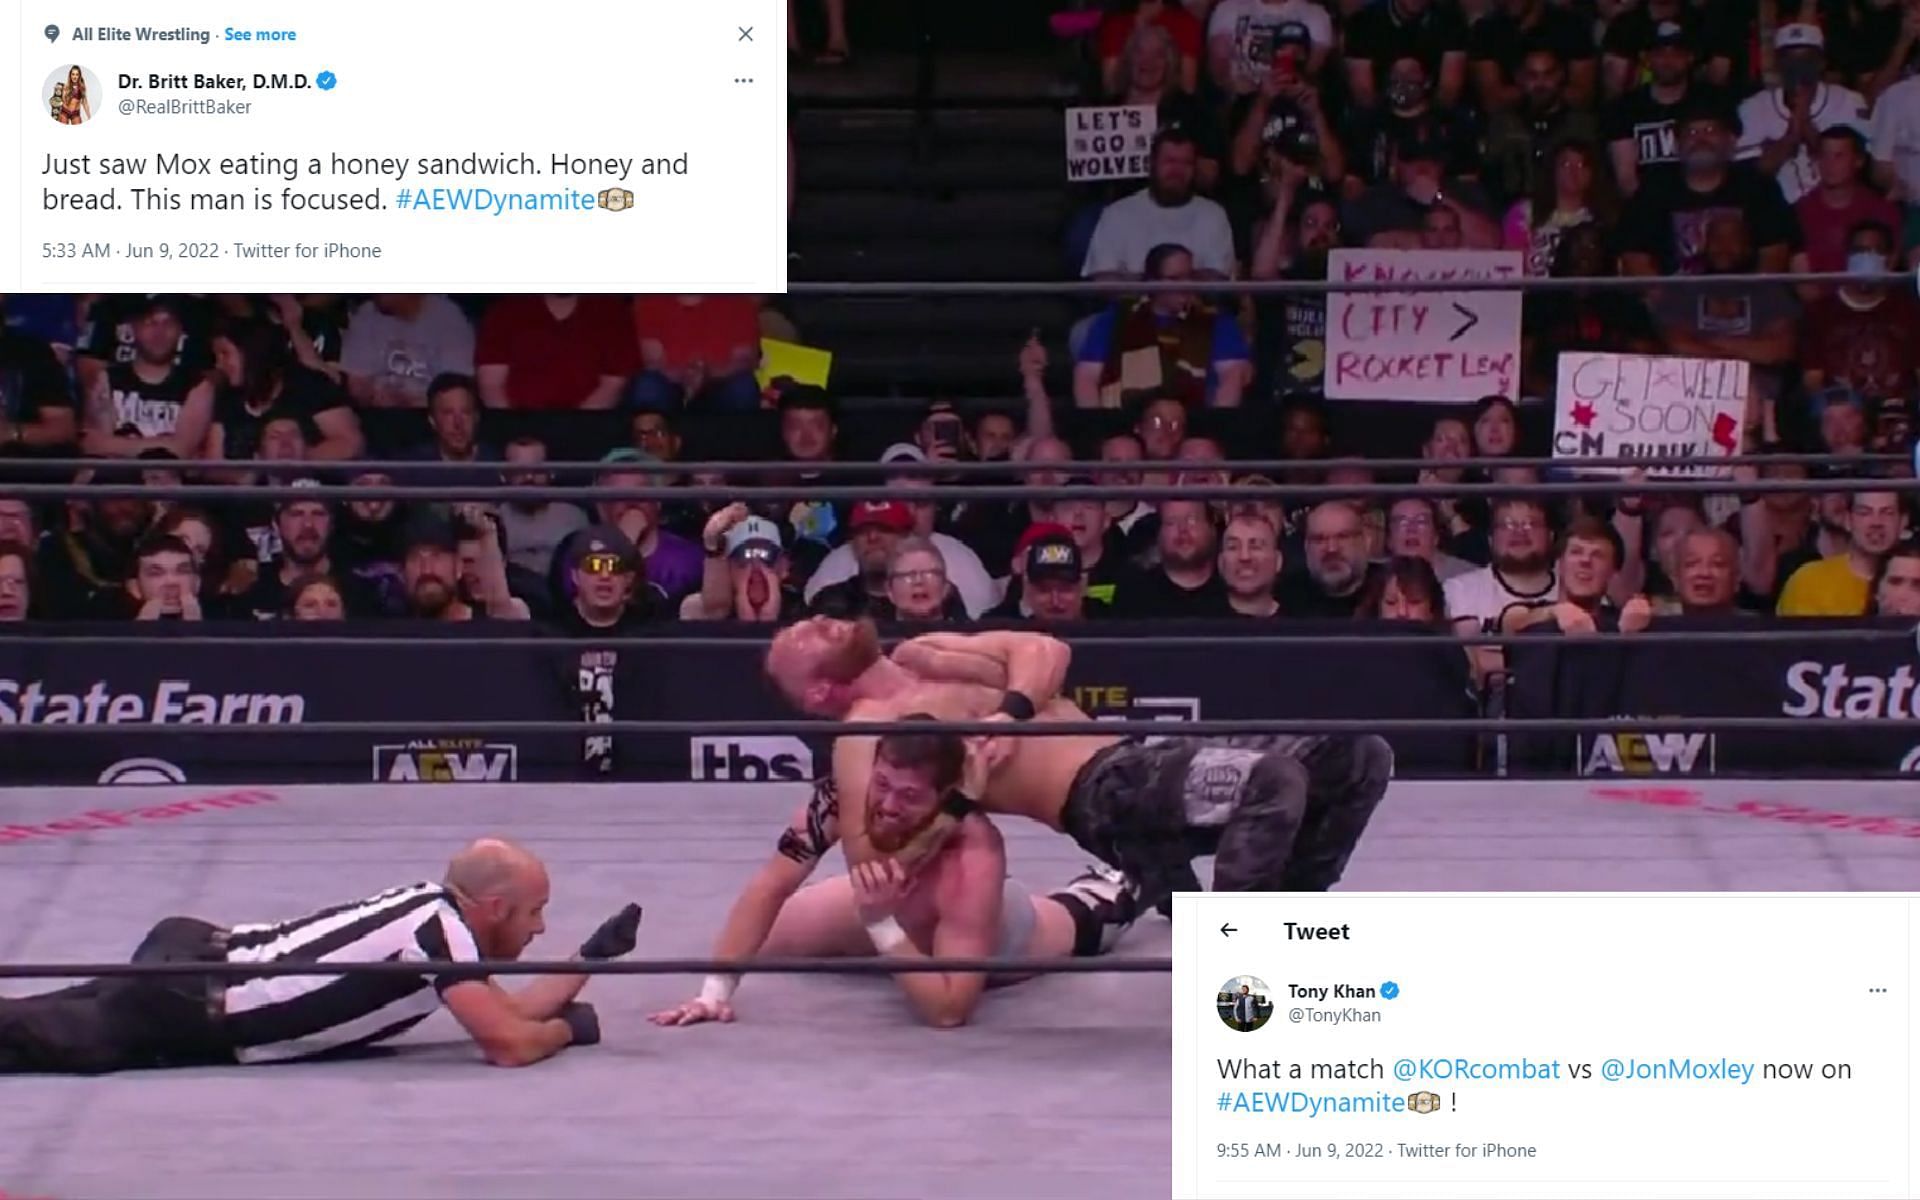 Jon Moxley&#039;s win on AEW Dynamite main event sparked reactions from wrestlers and fans.